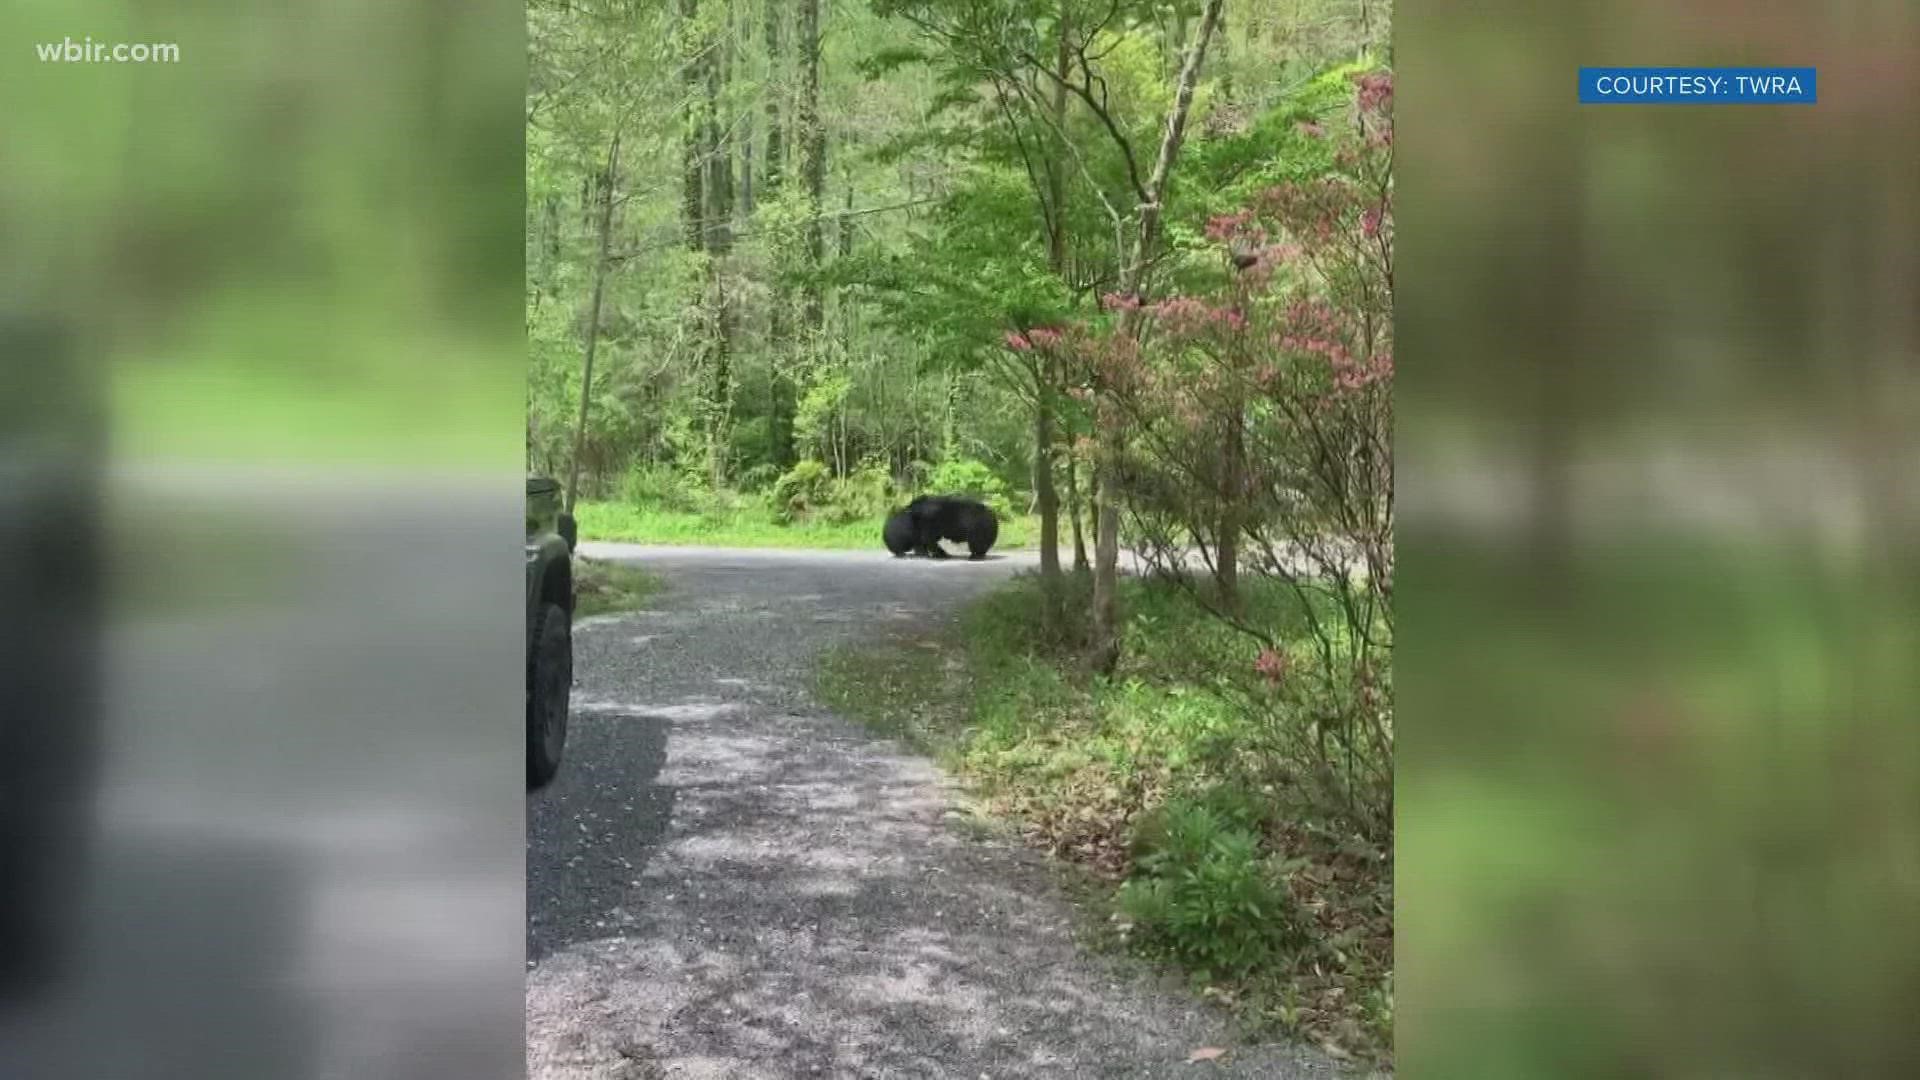 Officials with the Tennessee Wildlife Resources Agency said they believed the brawl could have broken out over a food source.